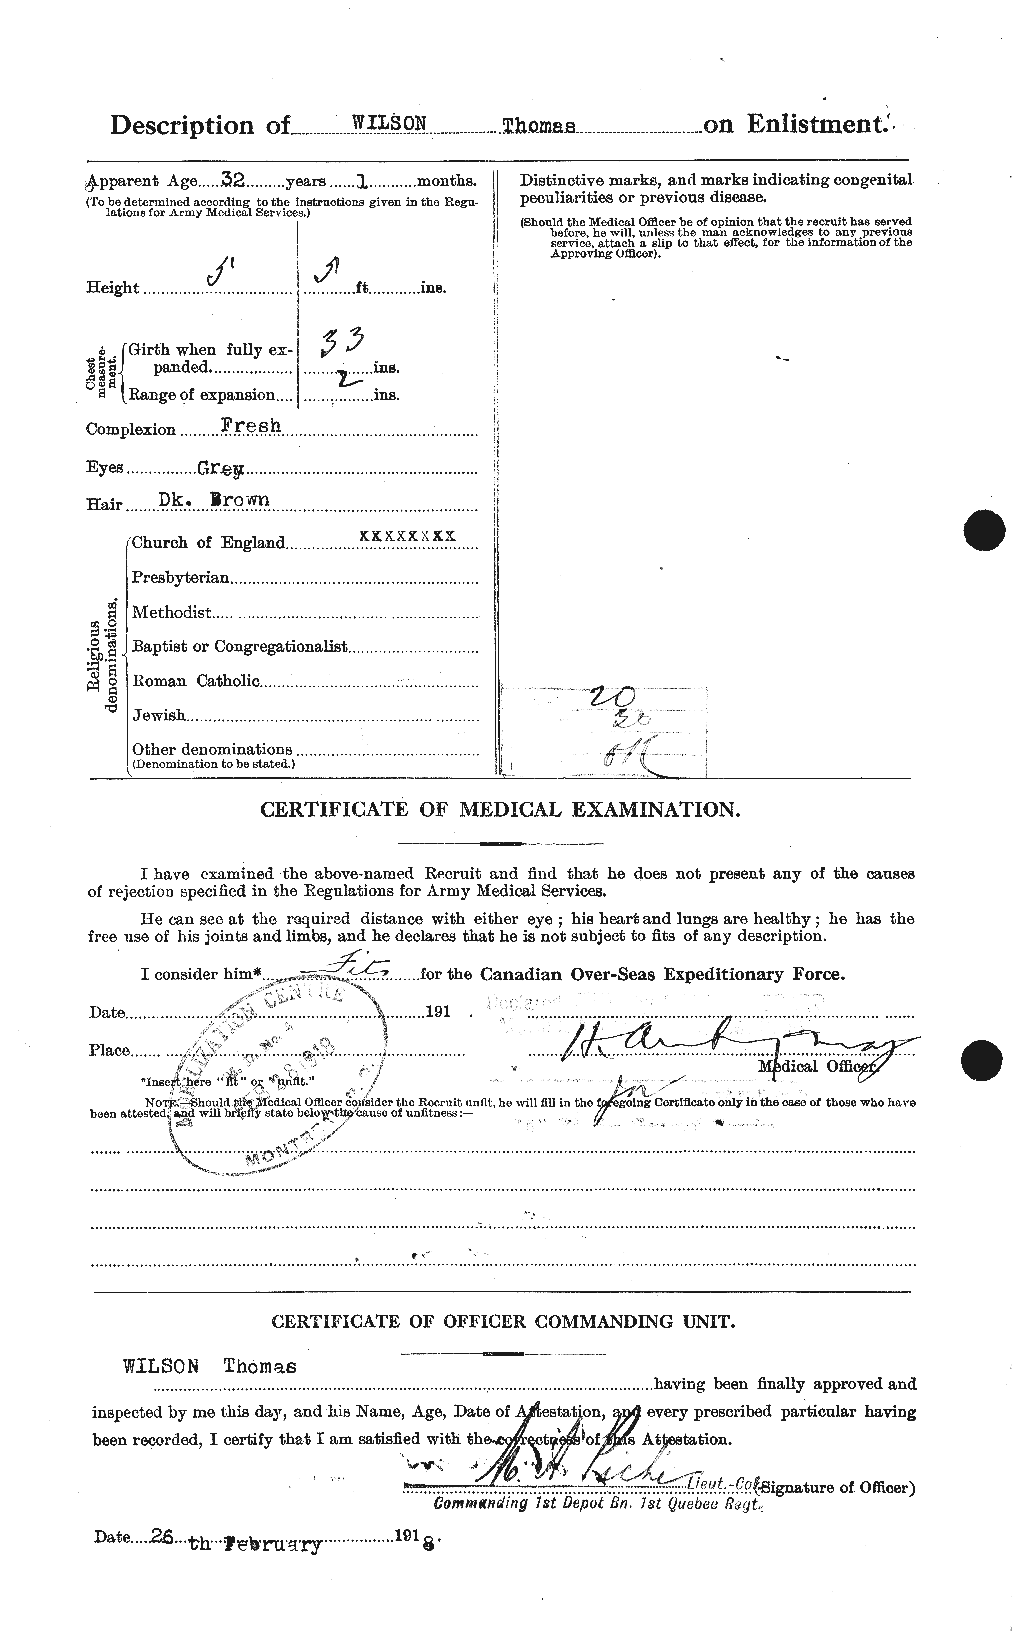 Personnel Records of the First World War - CEF 681211b